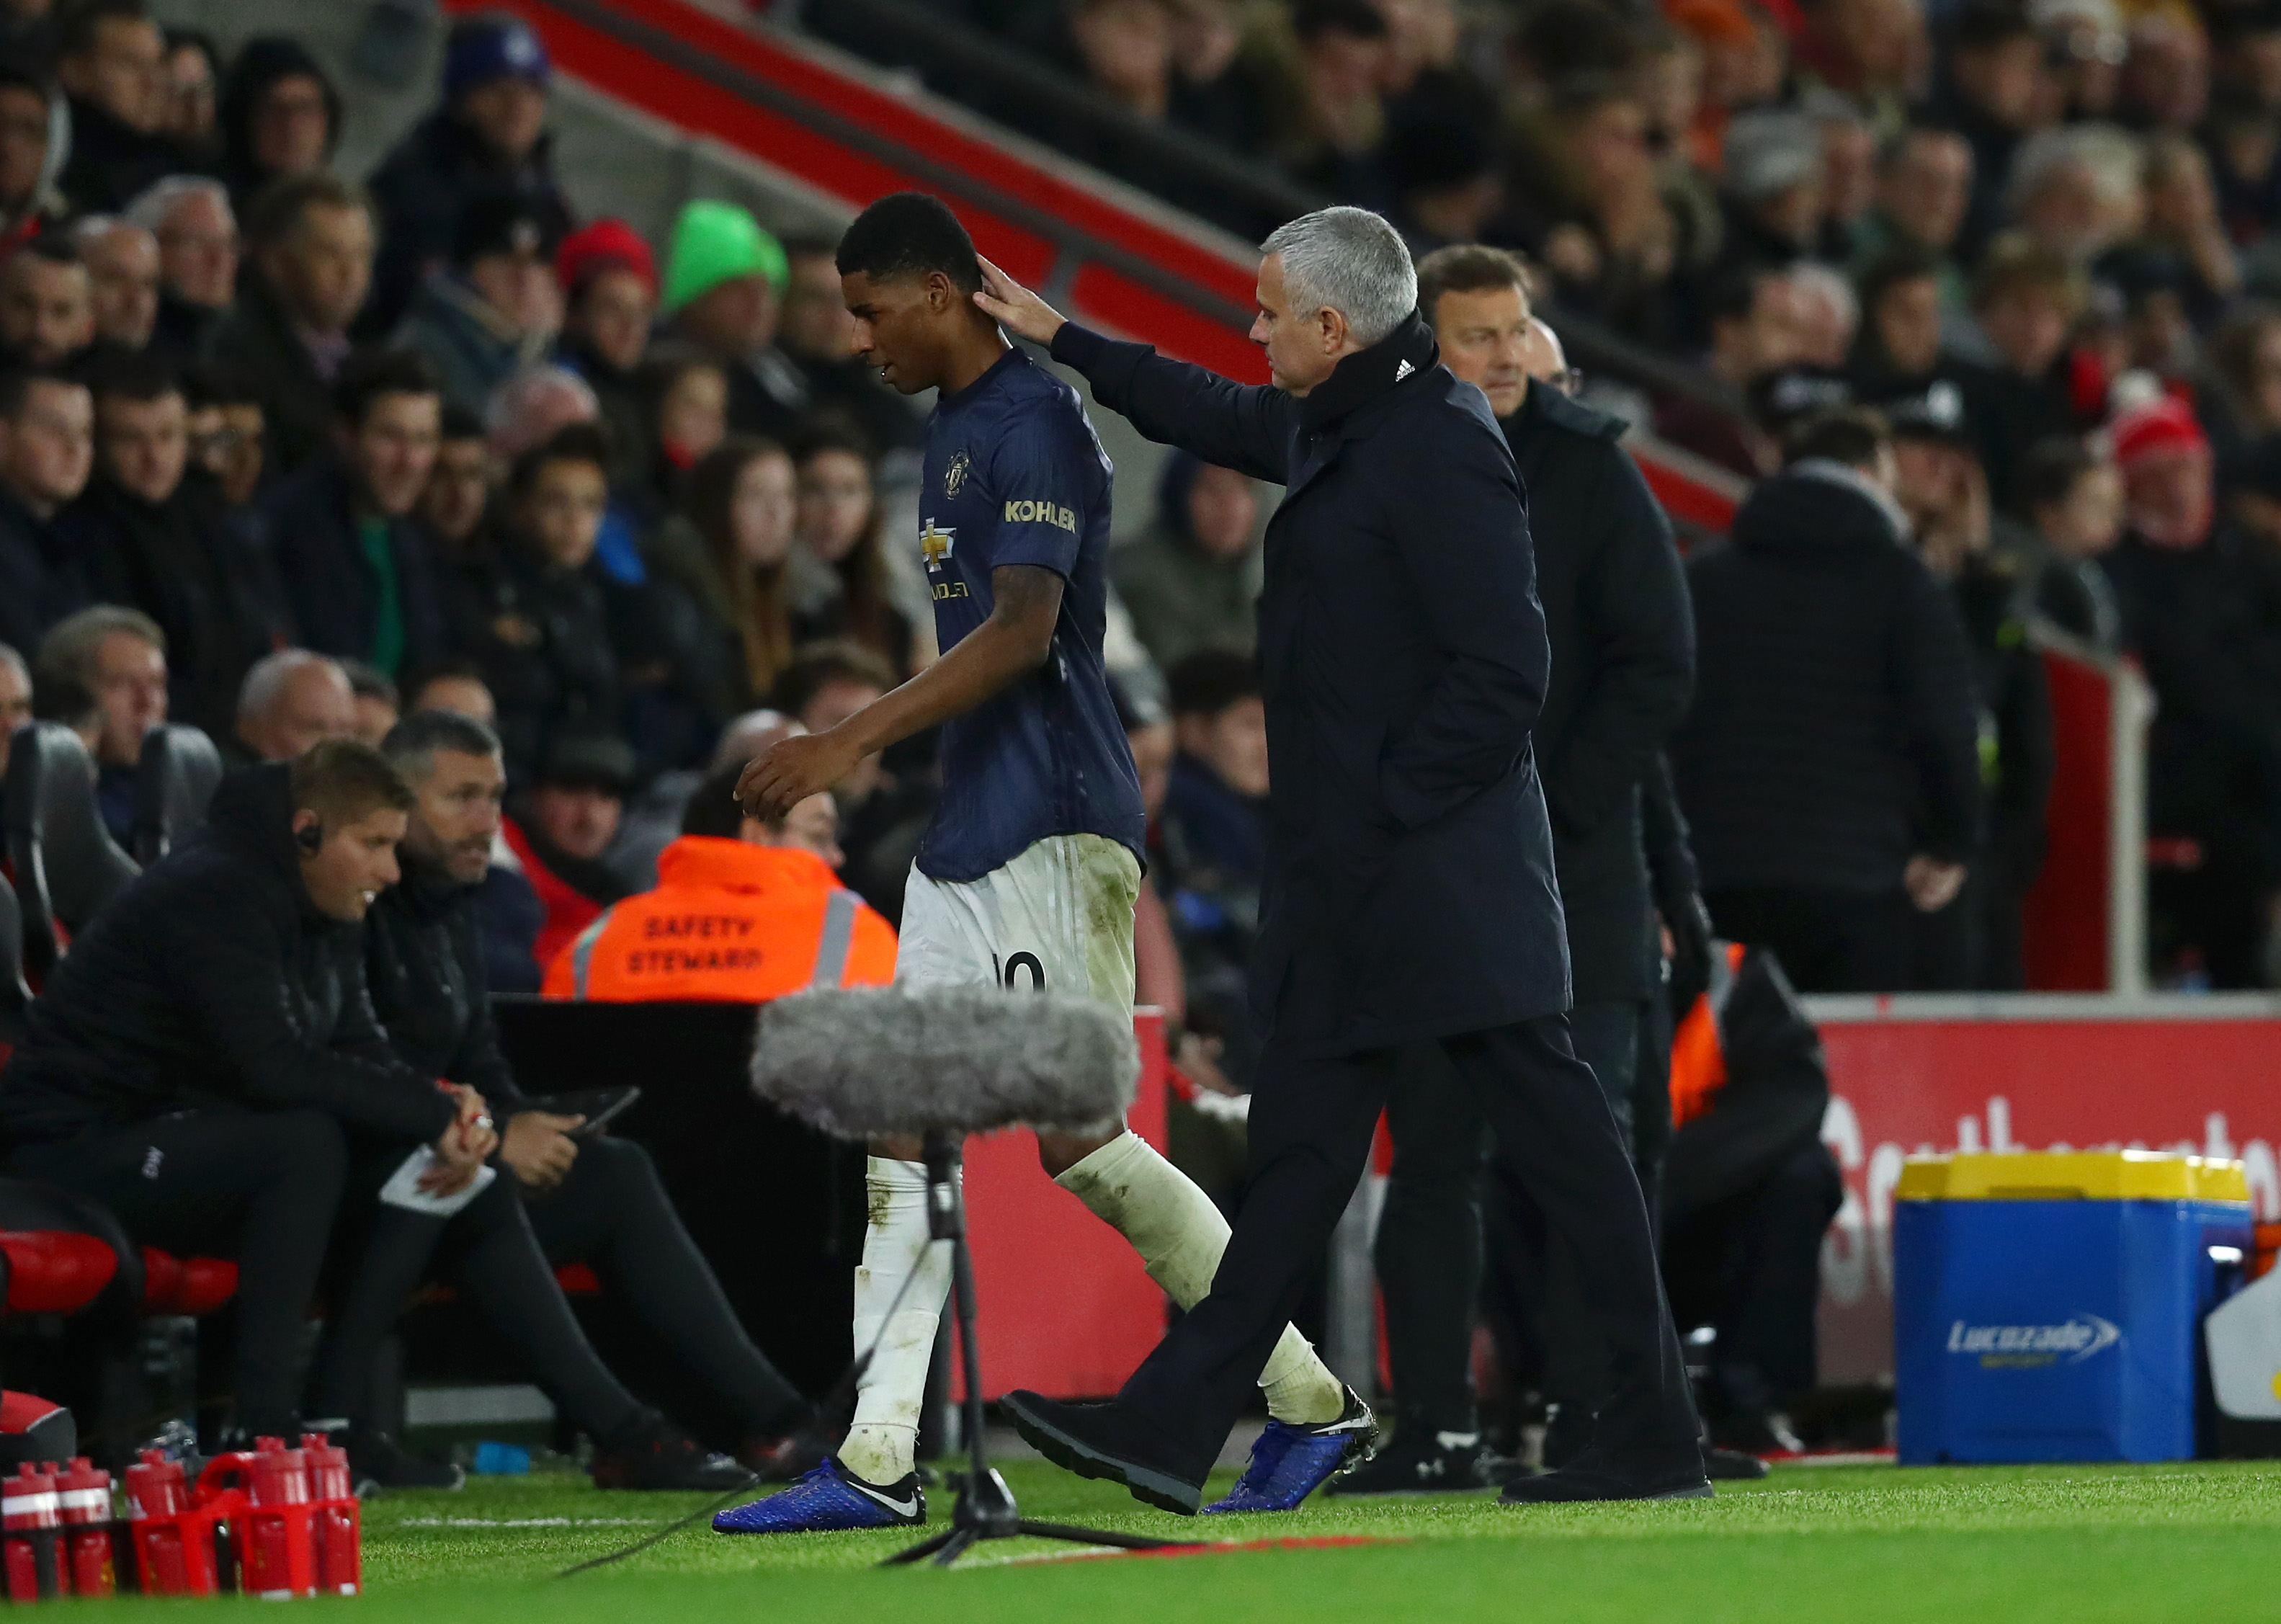 SOUTHAMPTON, ENGLAND - DECEMBER 01:  Jose Mourinho, Manager of Manchester United greets Marcus Rashford of Manchester United as he is substituted off during the Premier League match between Southampton FC and Manchester United at St Mary's Stadium on December 1, 2018 in Southampton, United Kingdom.  (Photo by Dan Istitene/Getty Images)